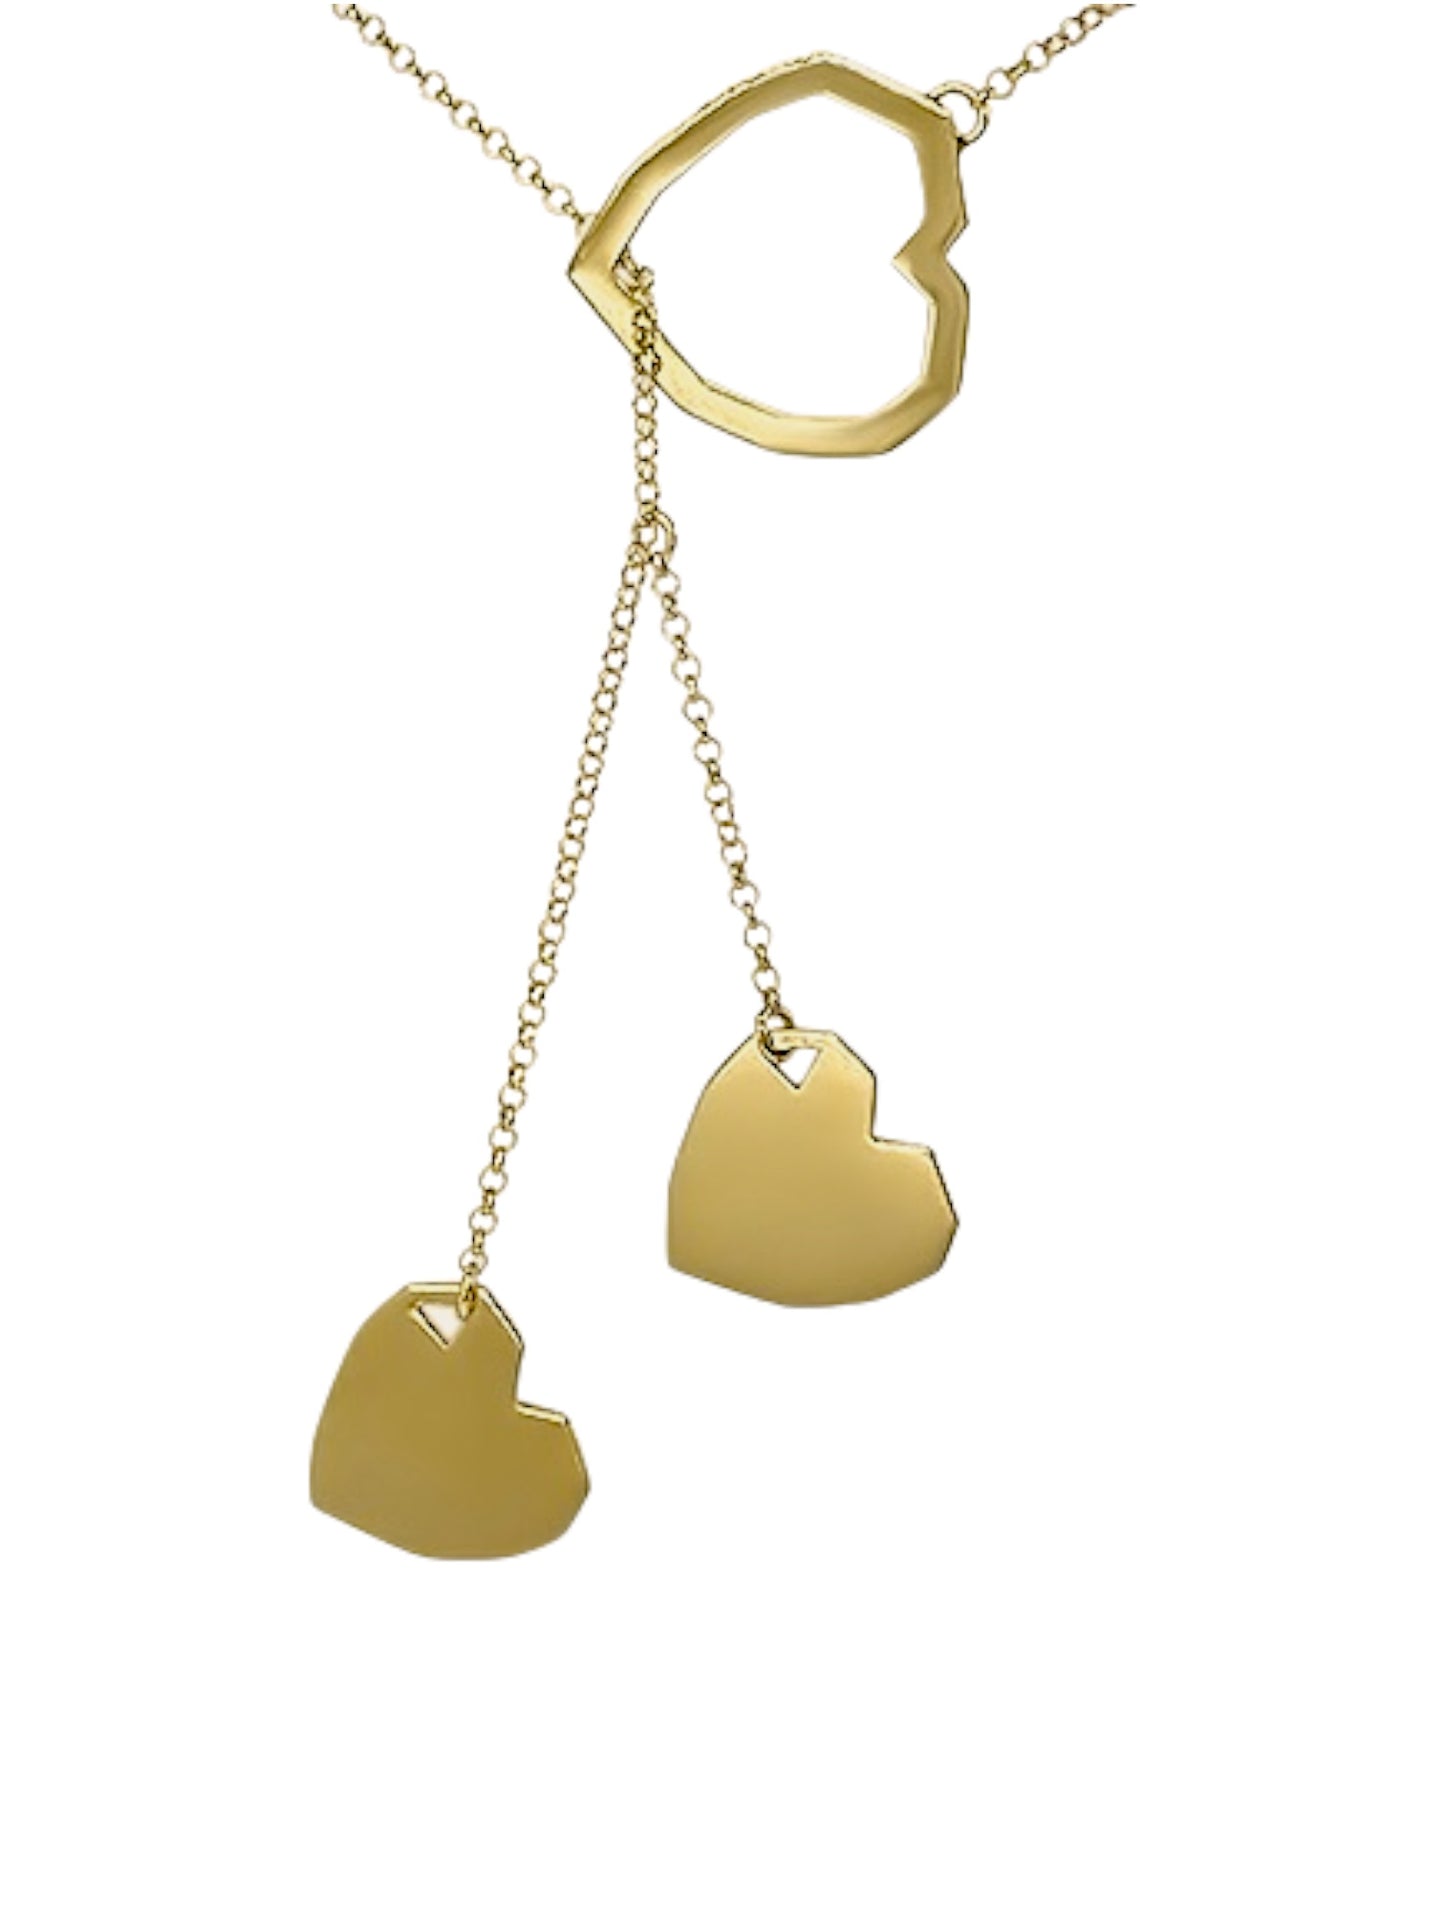 Heart to Heart Necklace from Love collection, 18-karat-gold-plated silver